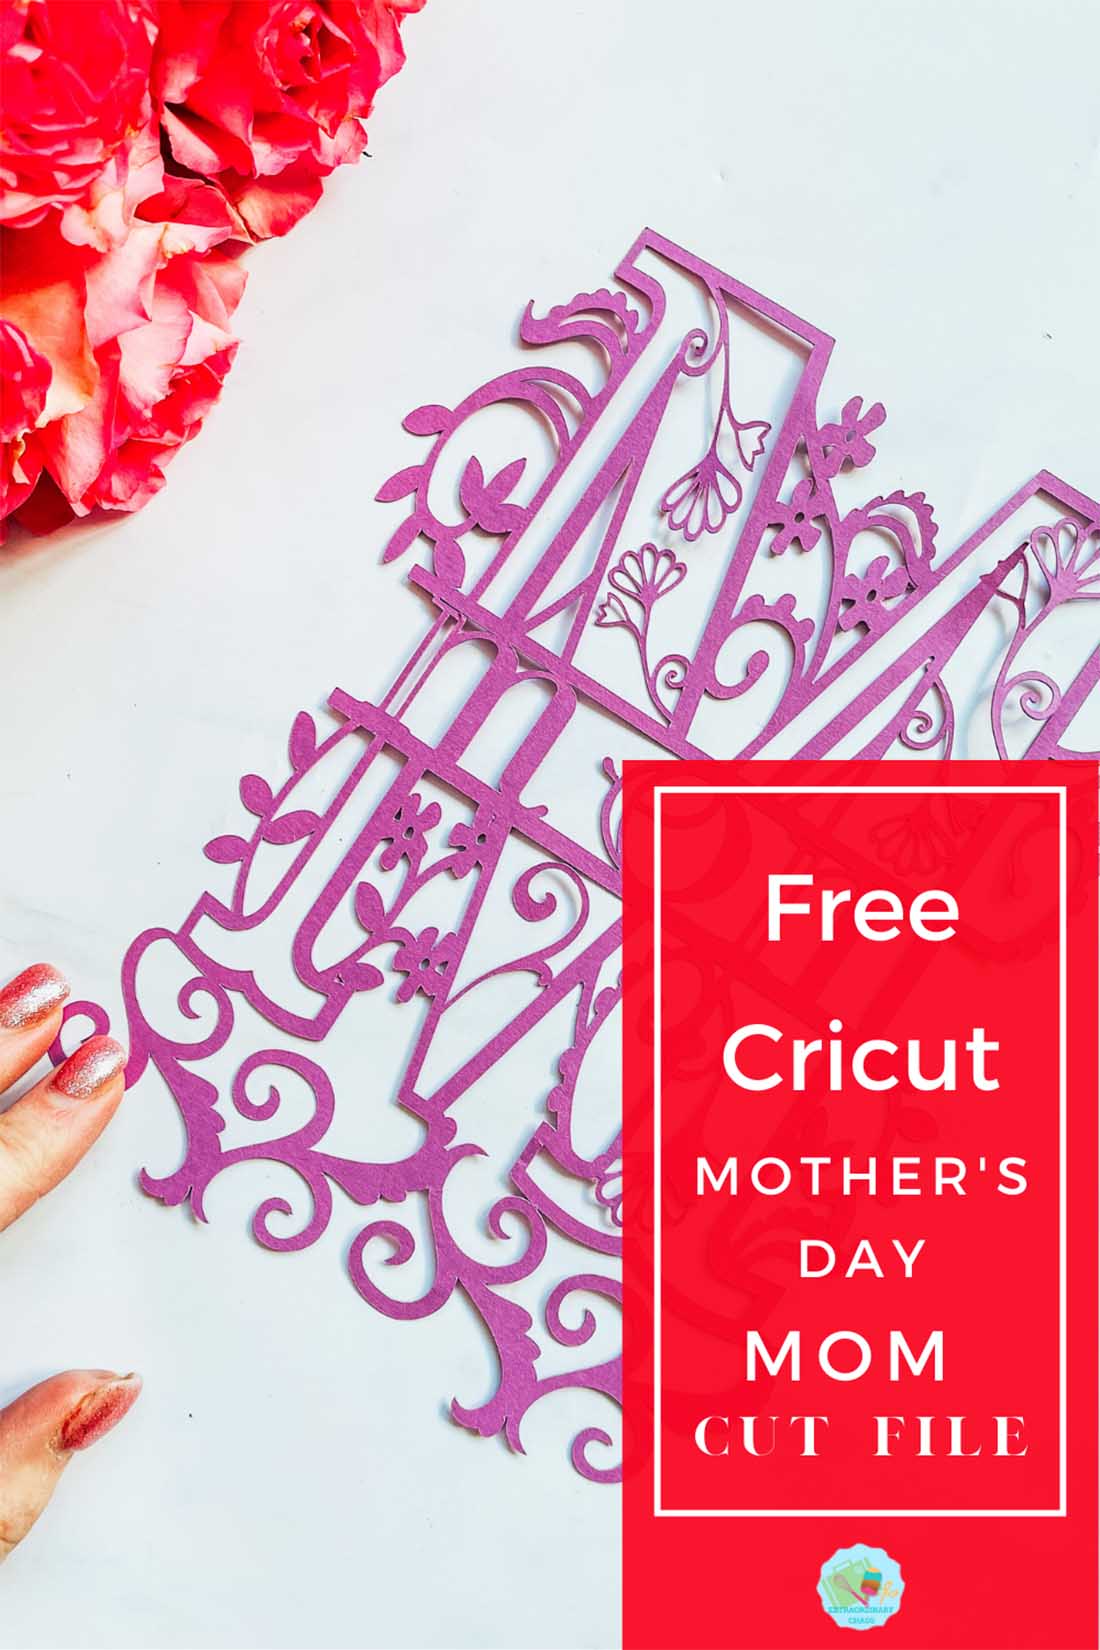 Free download for a Cricut Mom mothers day cut file for mothers day cards or scrapbooking